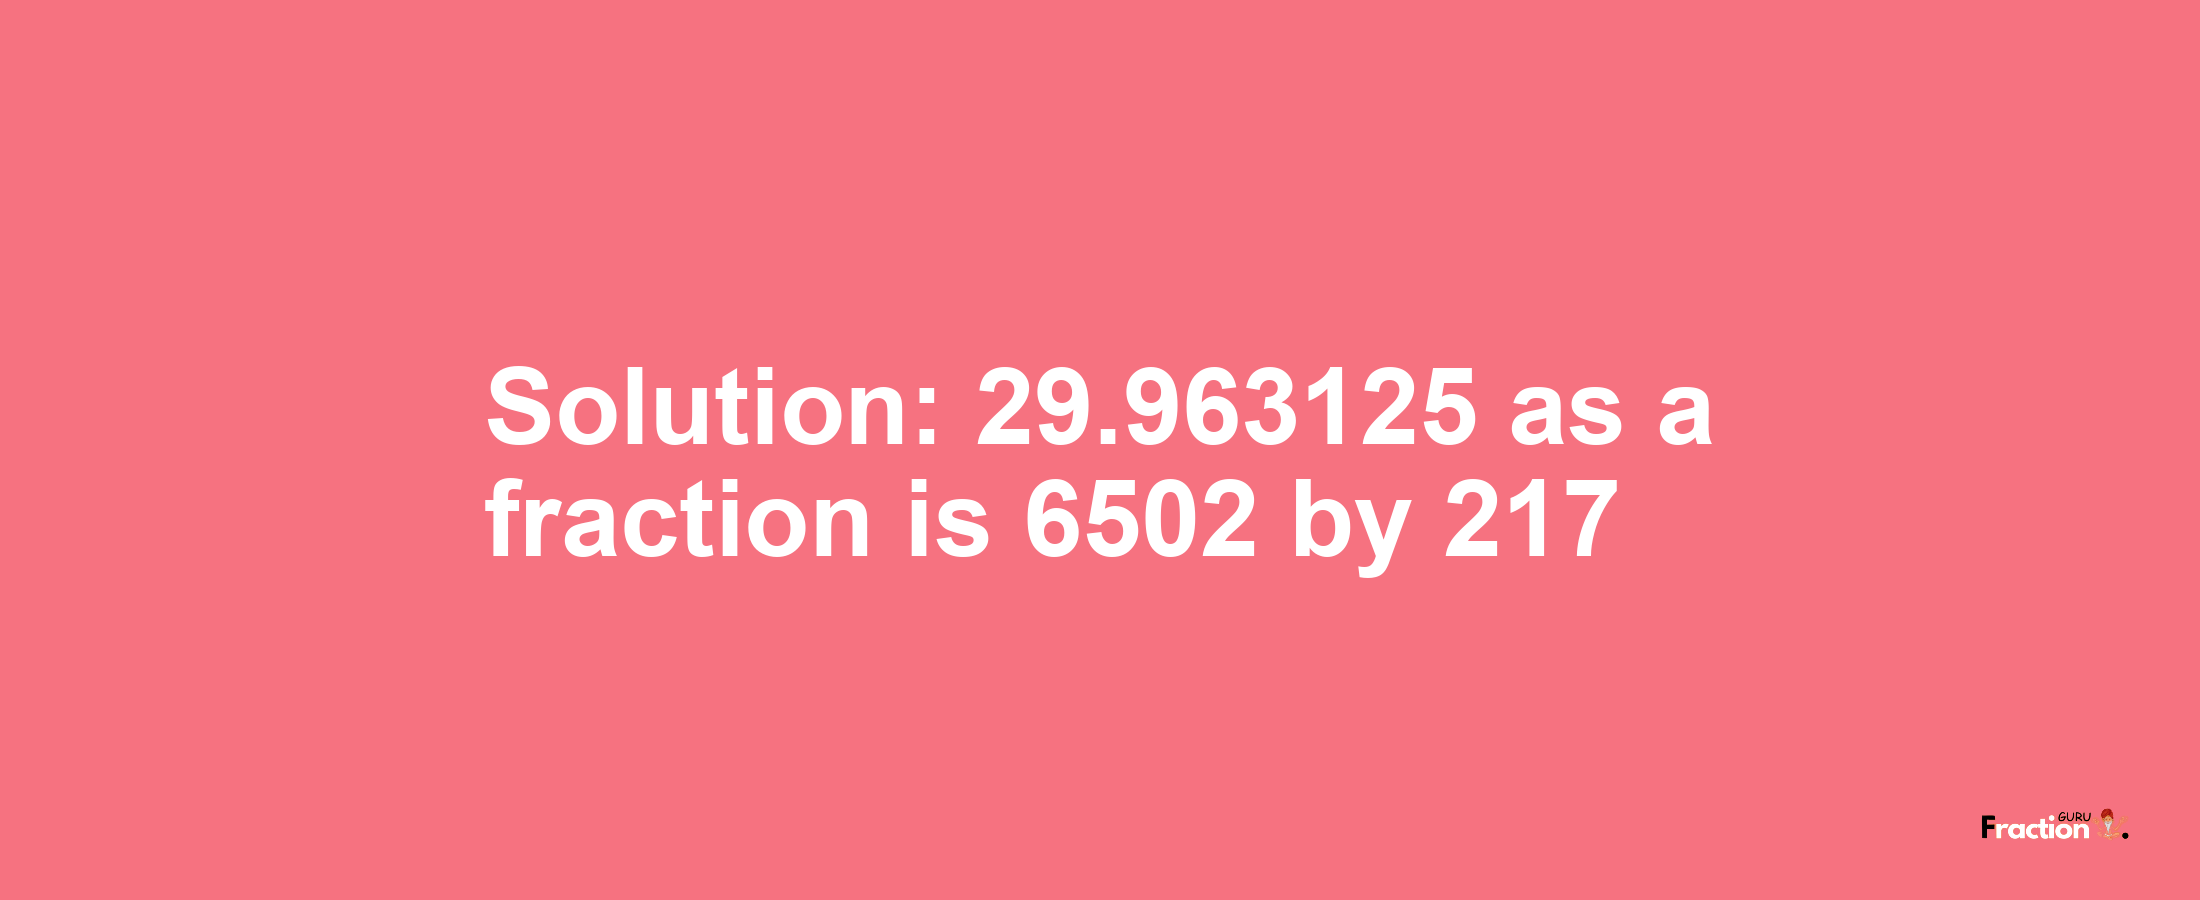 Solution:29.963125 as a fraction is 6502/217